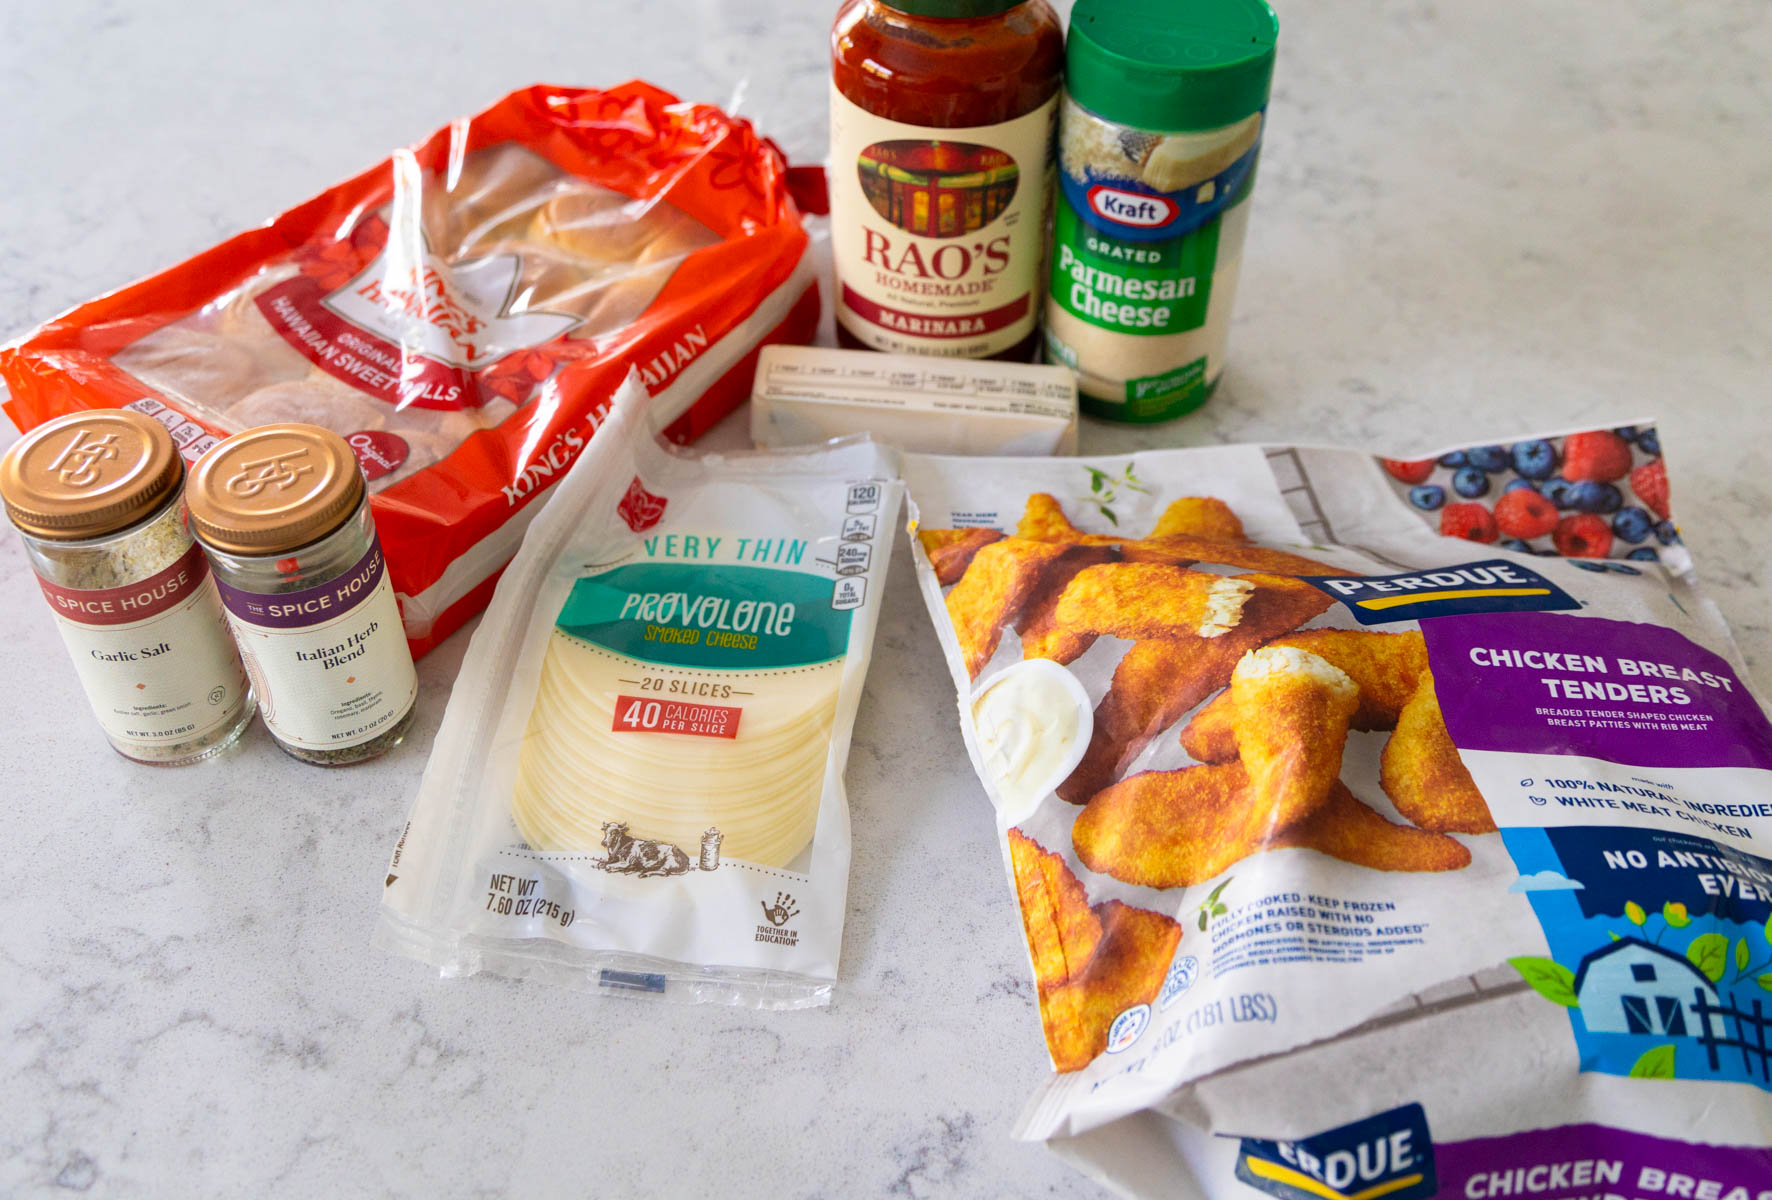 The ingredients to make chicken parm sliders are on the counter.